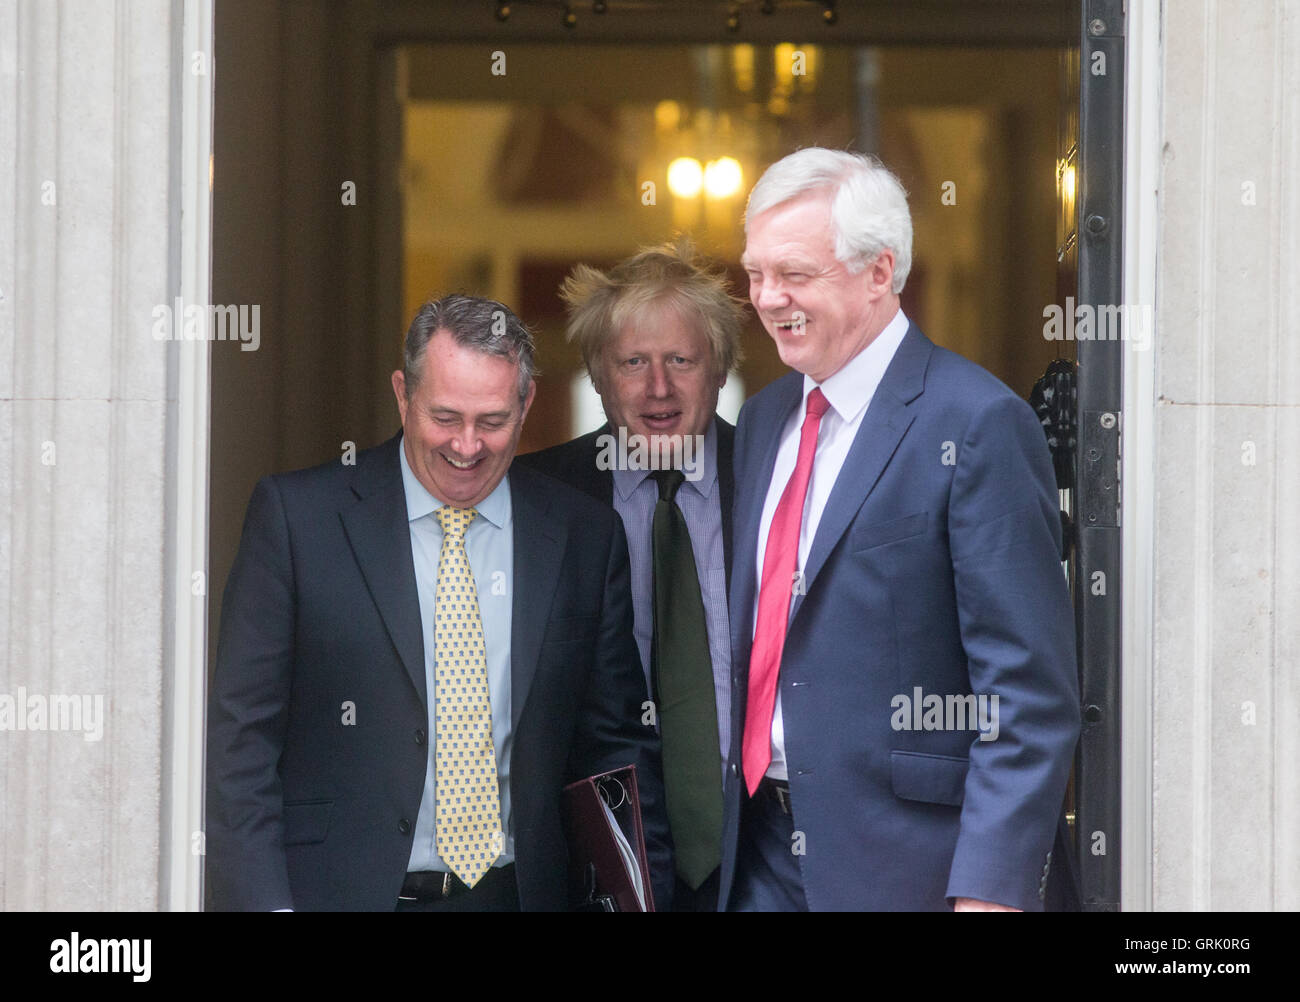 Liam Fox,Boris Johnson and David Davis,the three Brexiteers,leave number 10 Downing Street after a Cabinet meeting Stock Photo